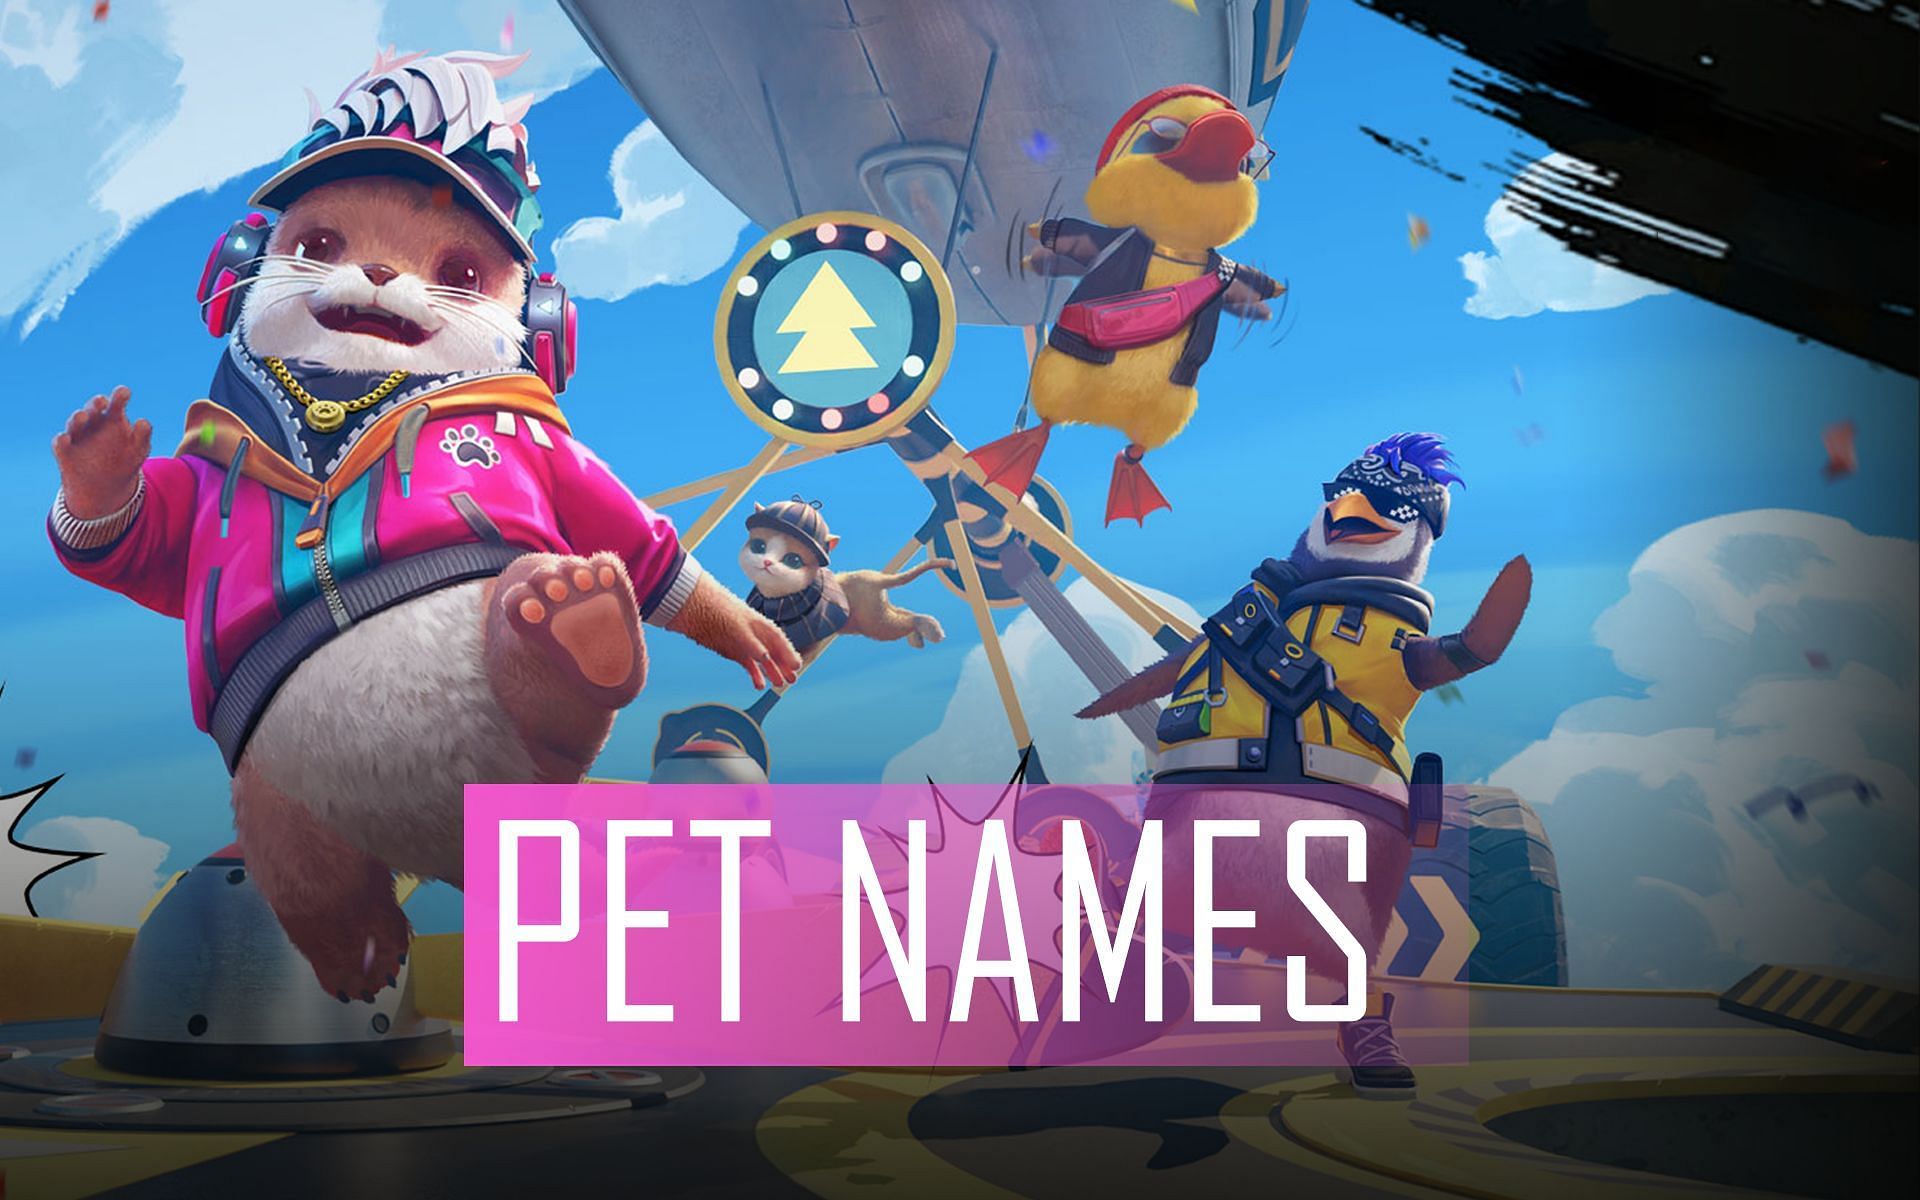 Free Fire Names 2021: Best Stylish Nicknames For Free Fire, Pet